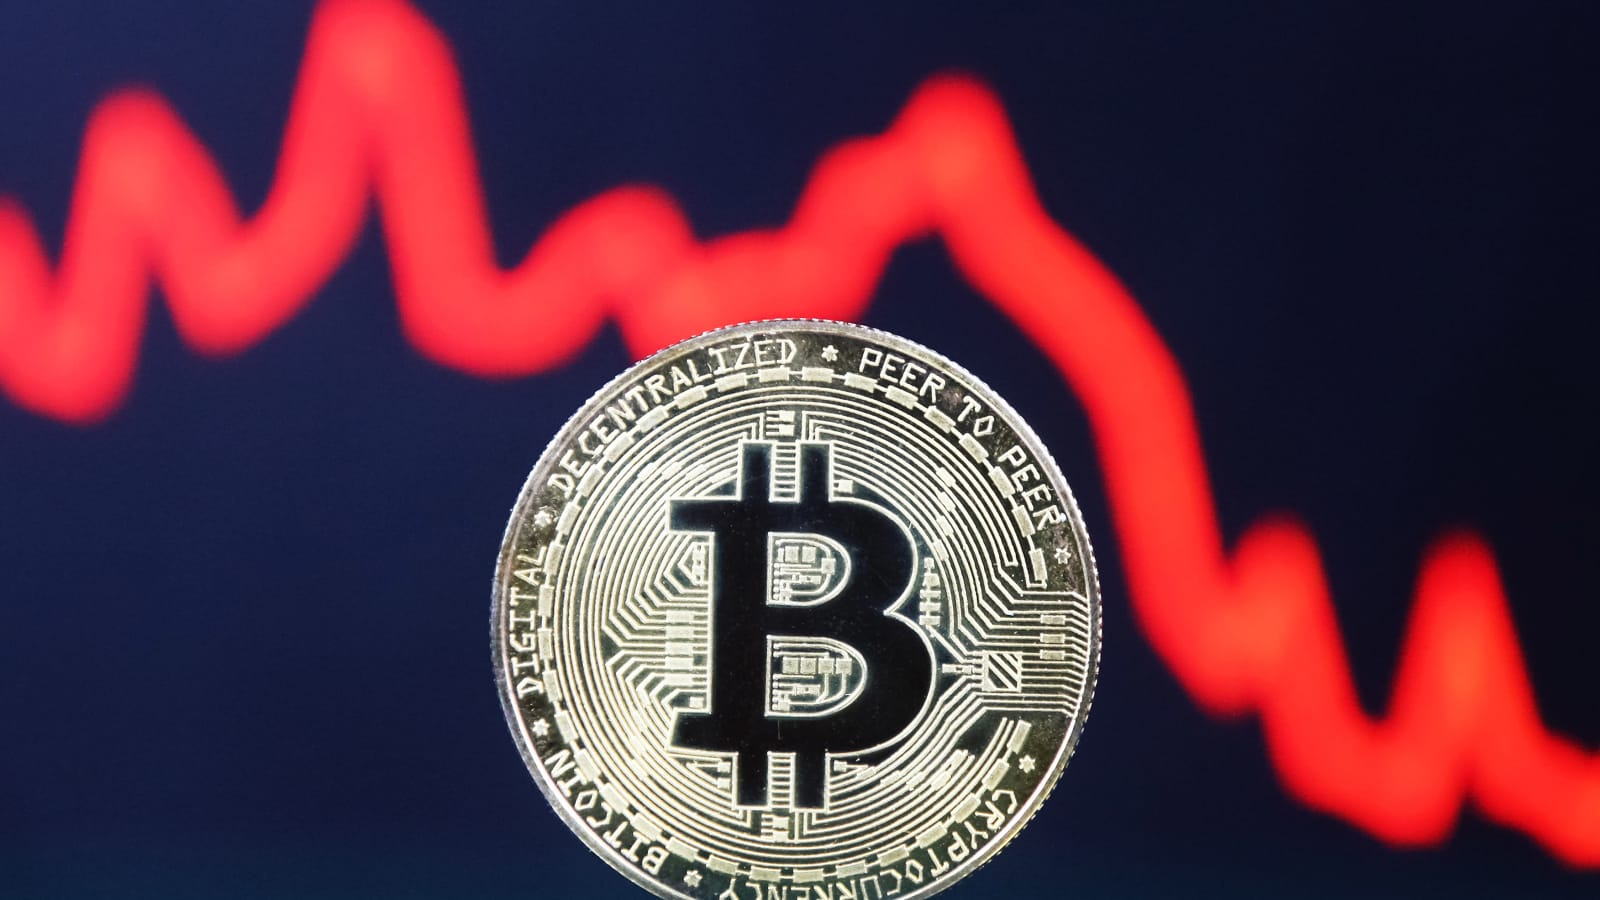 Bitcoin price rises above $30, for first time since June | Bitcoin | The Guardian